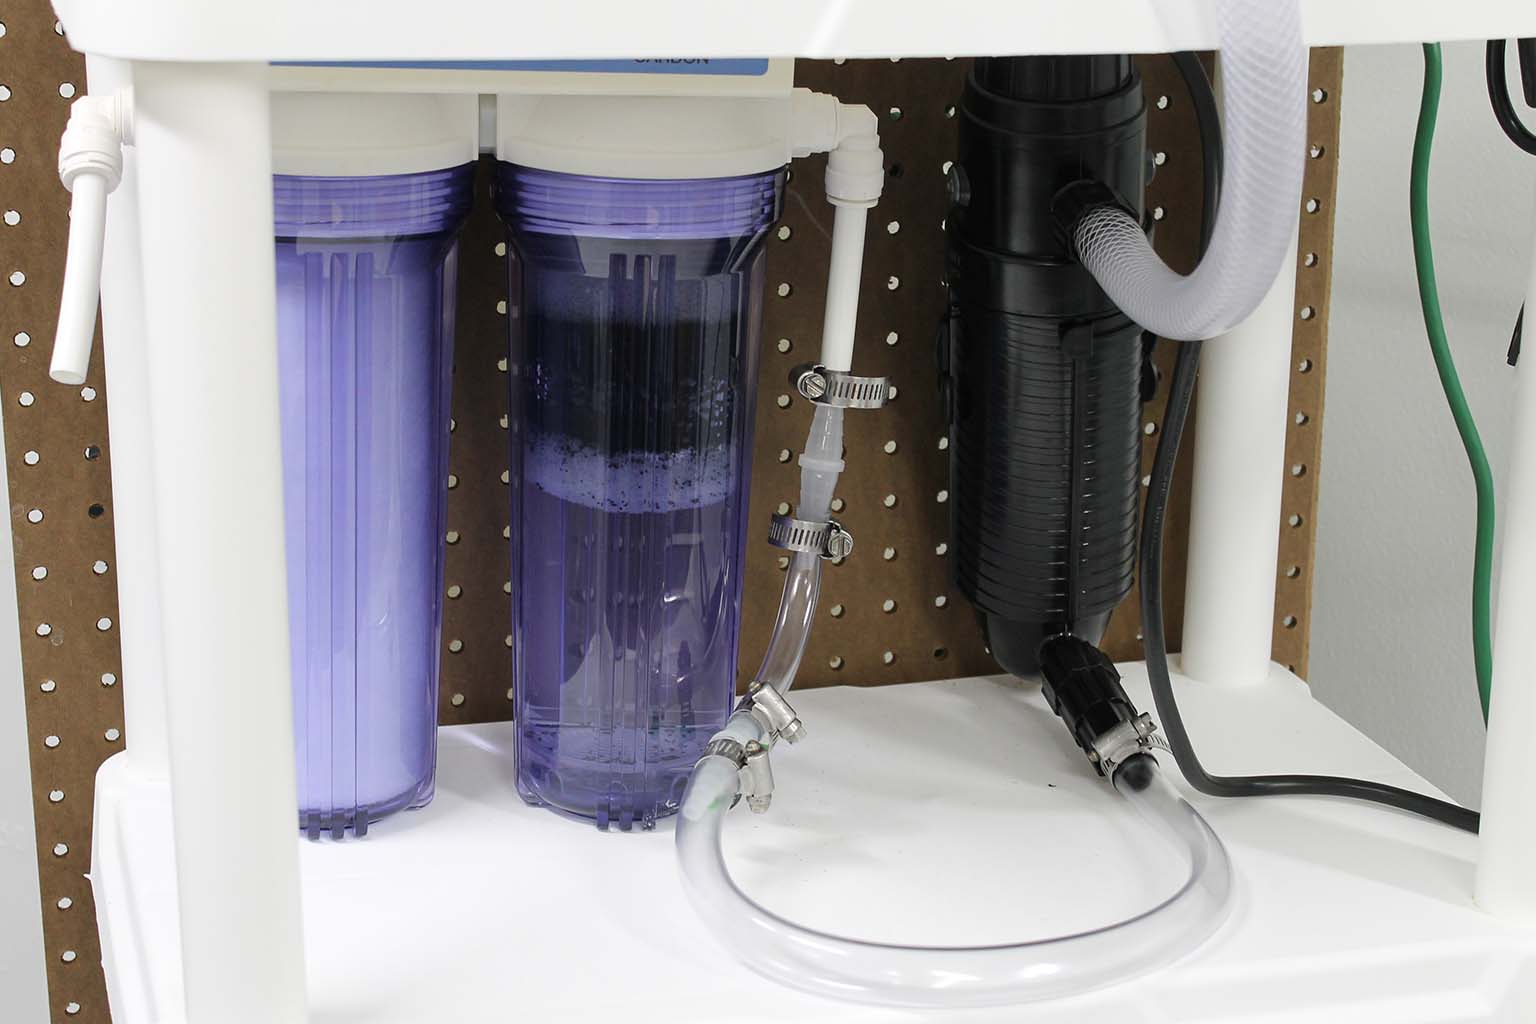 The three filtering containers connected to the 100-gallon tank that stores the artificial seawater for the coral tanks.